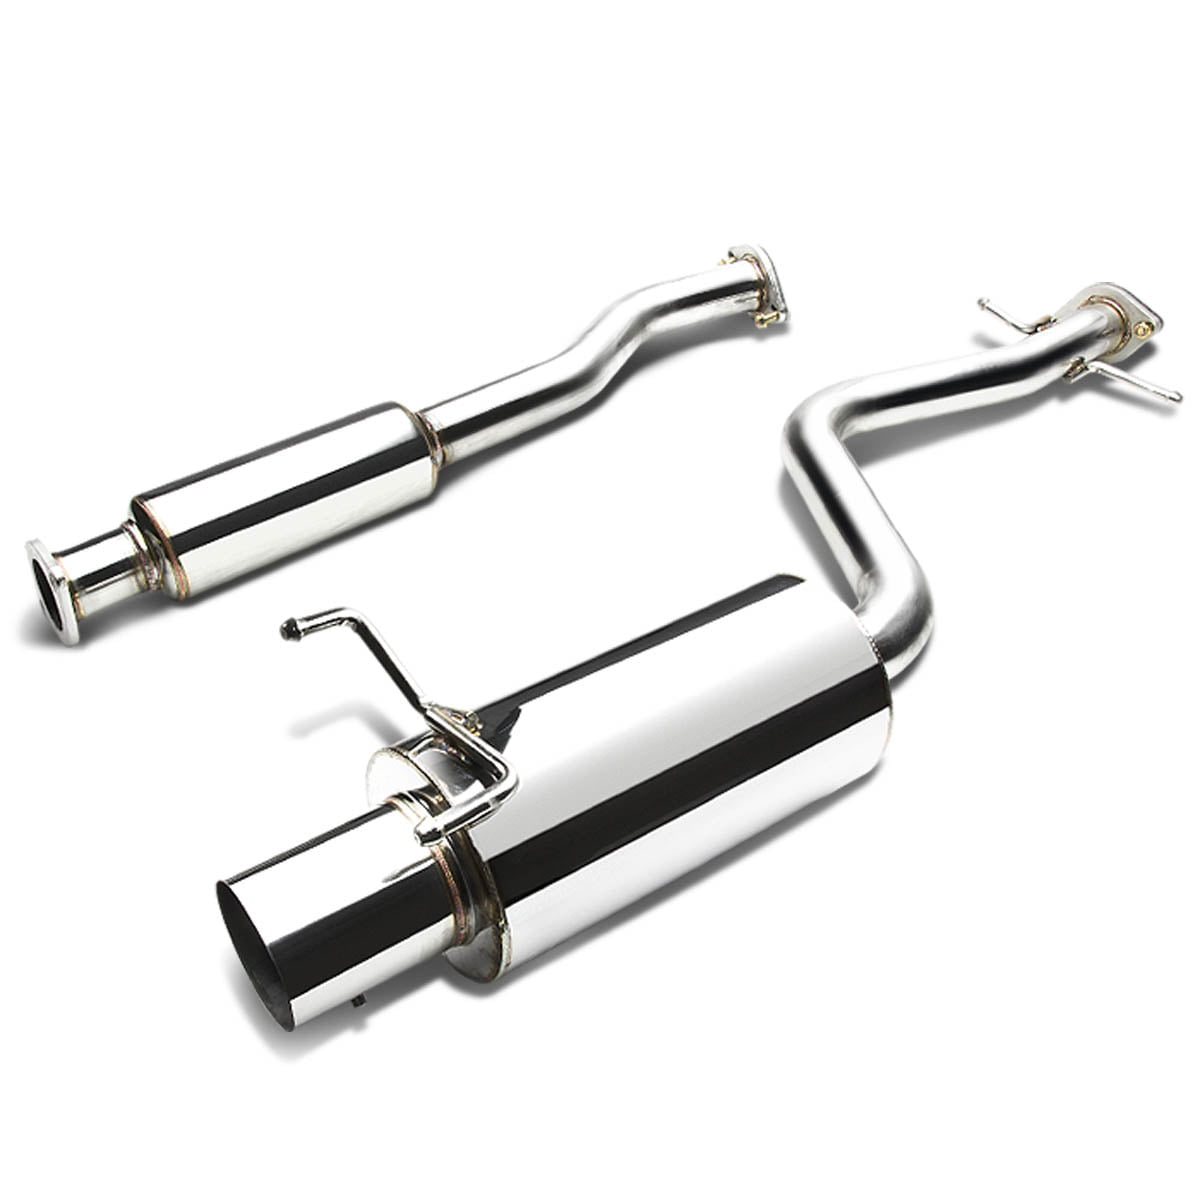 For 2001 to 2005 Lexus IS300 Catback Exhaust System 4" Tip Muffler